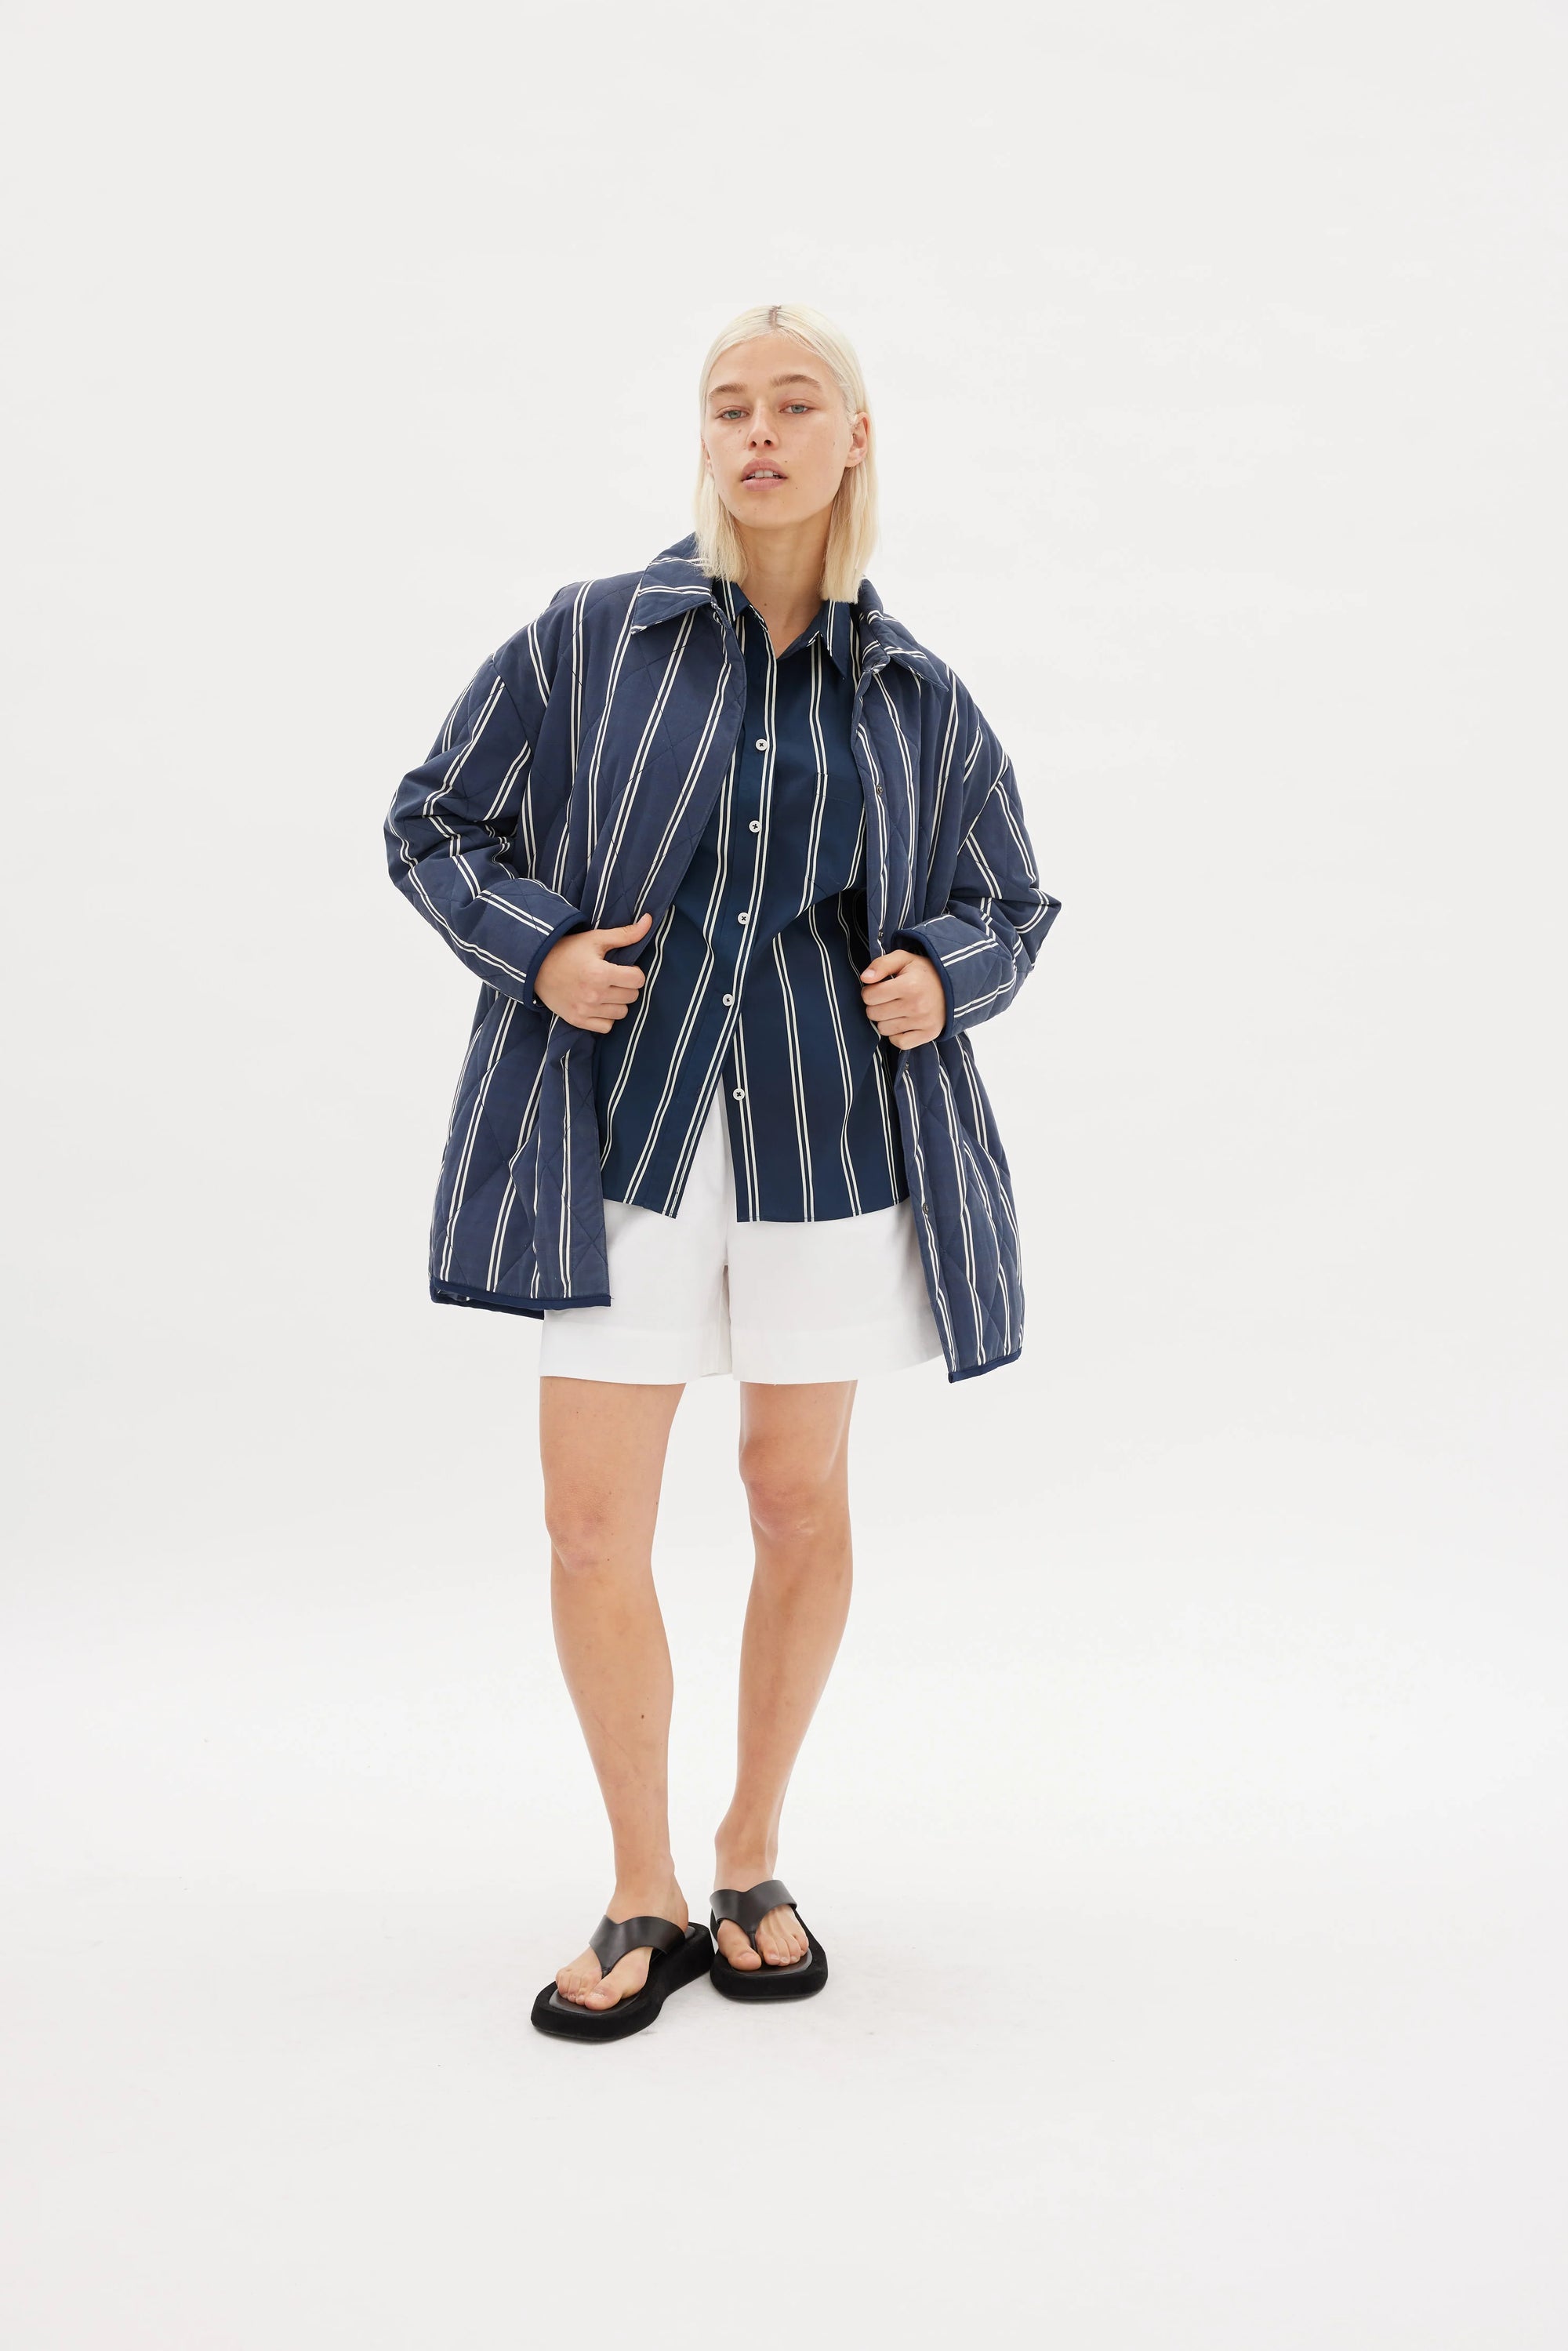 Parker Quilted Jacket - Stripes Navy / White